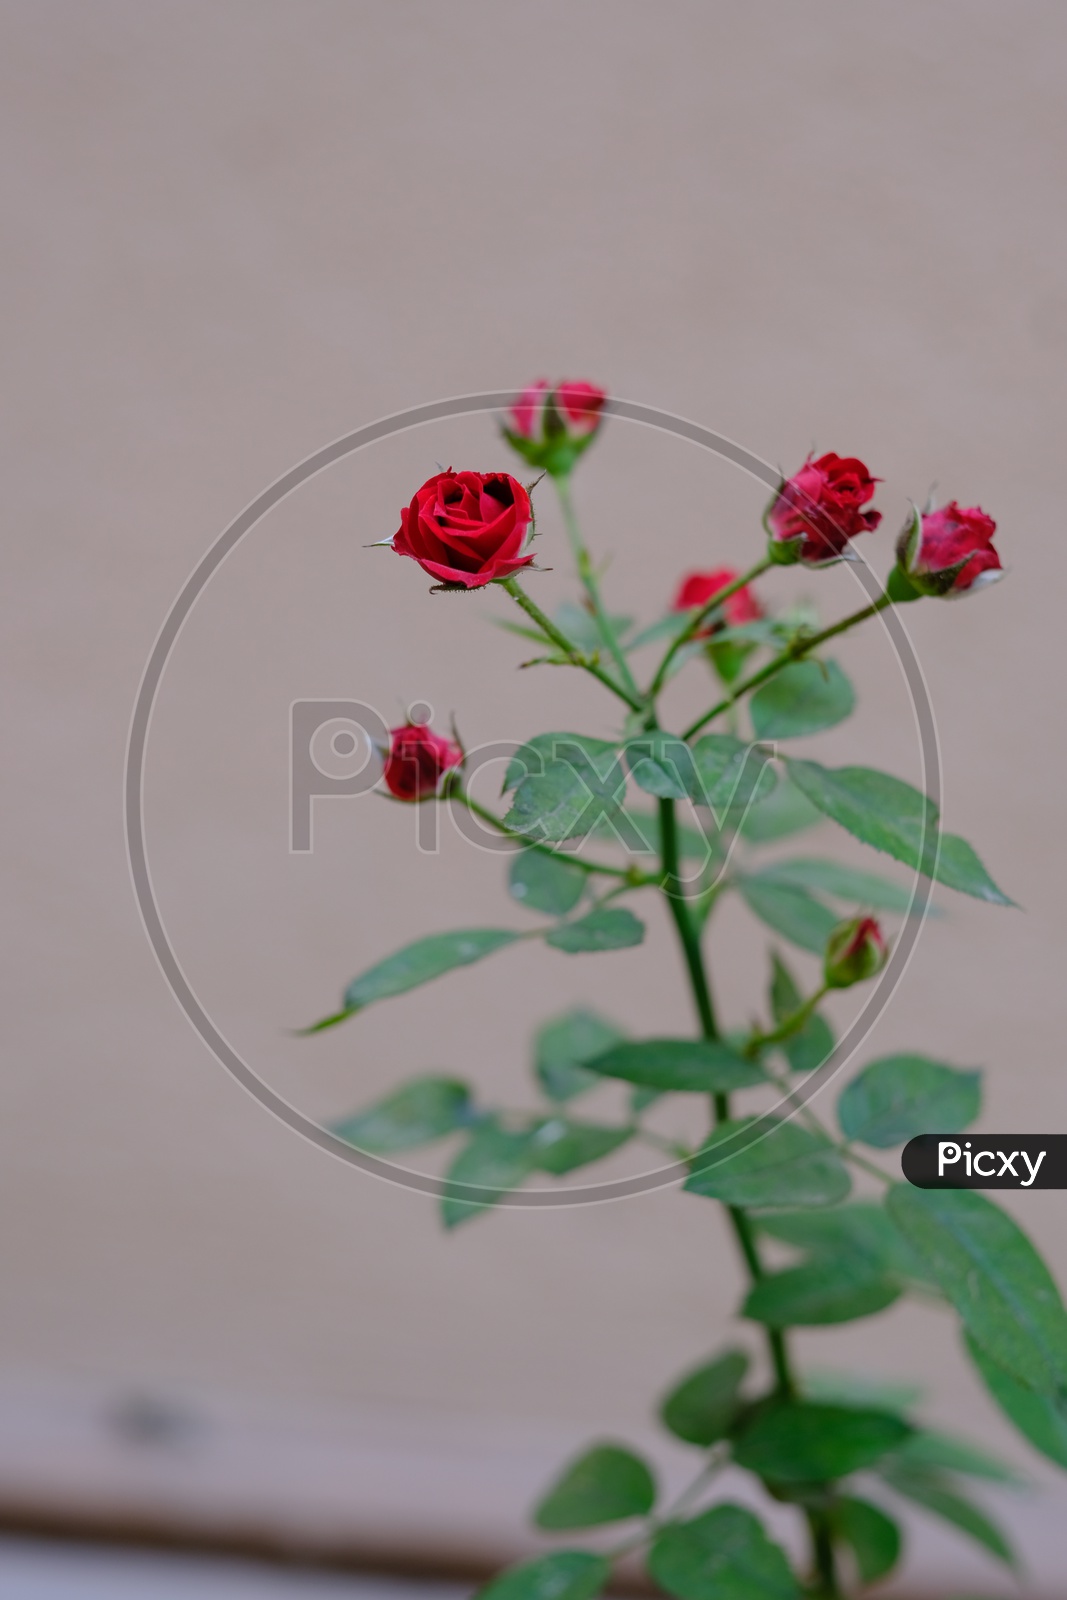 Roses on a plant.